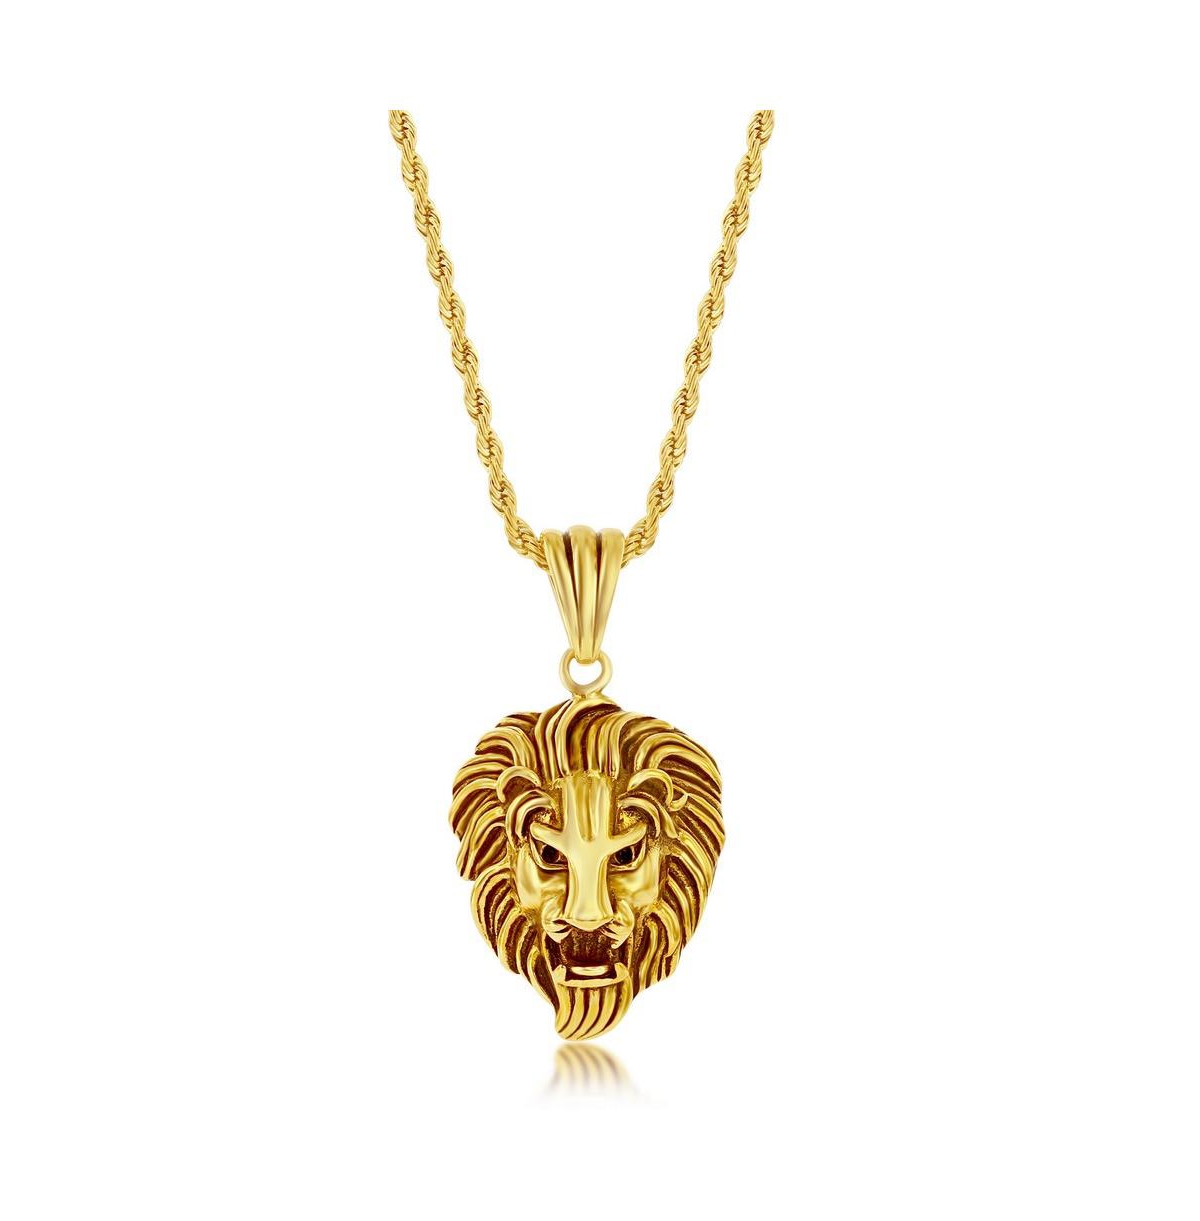 BLACKJACK MENS STAINLESS STEEL OXIDIZED LION NECKLACE - GOLD PLATED